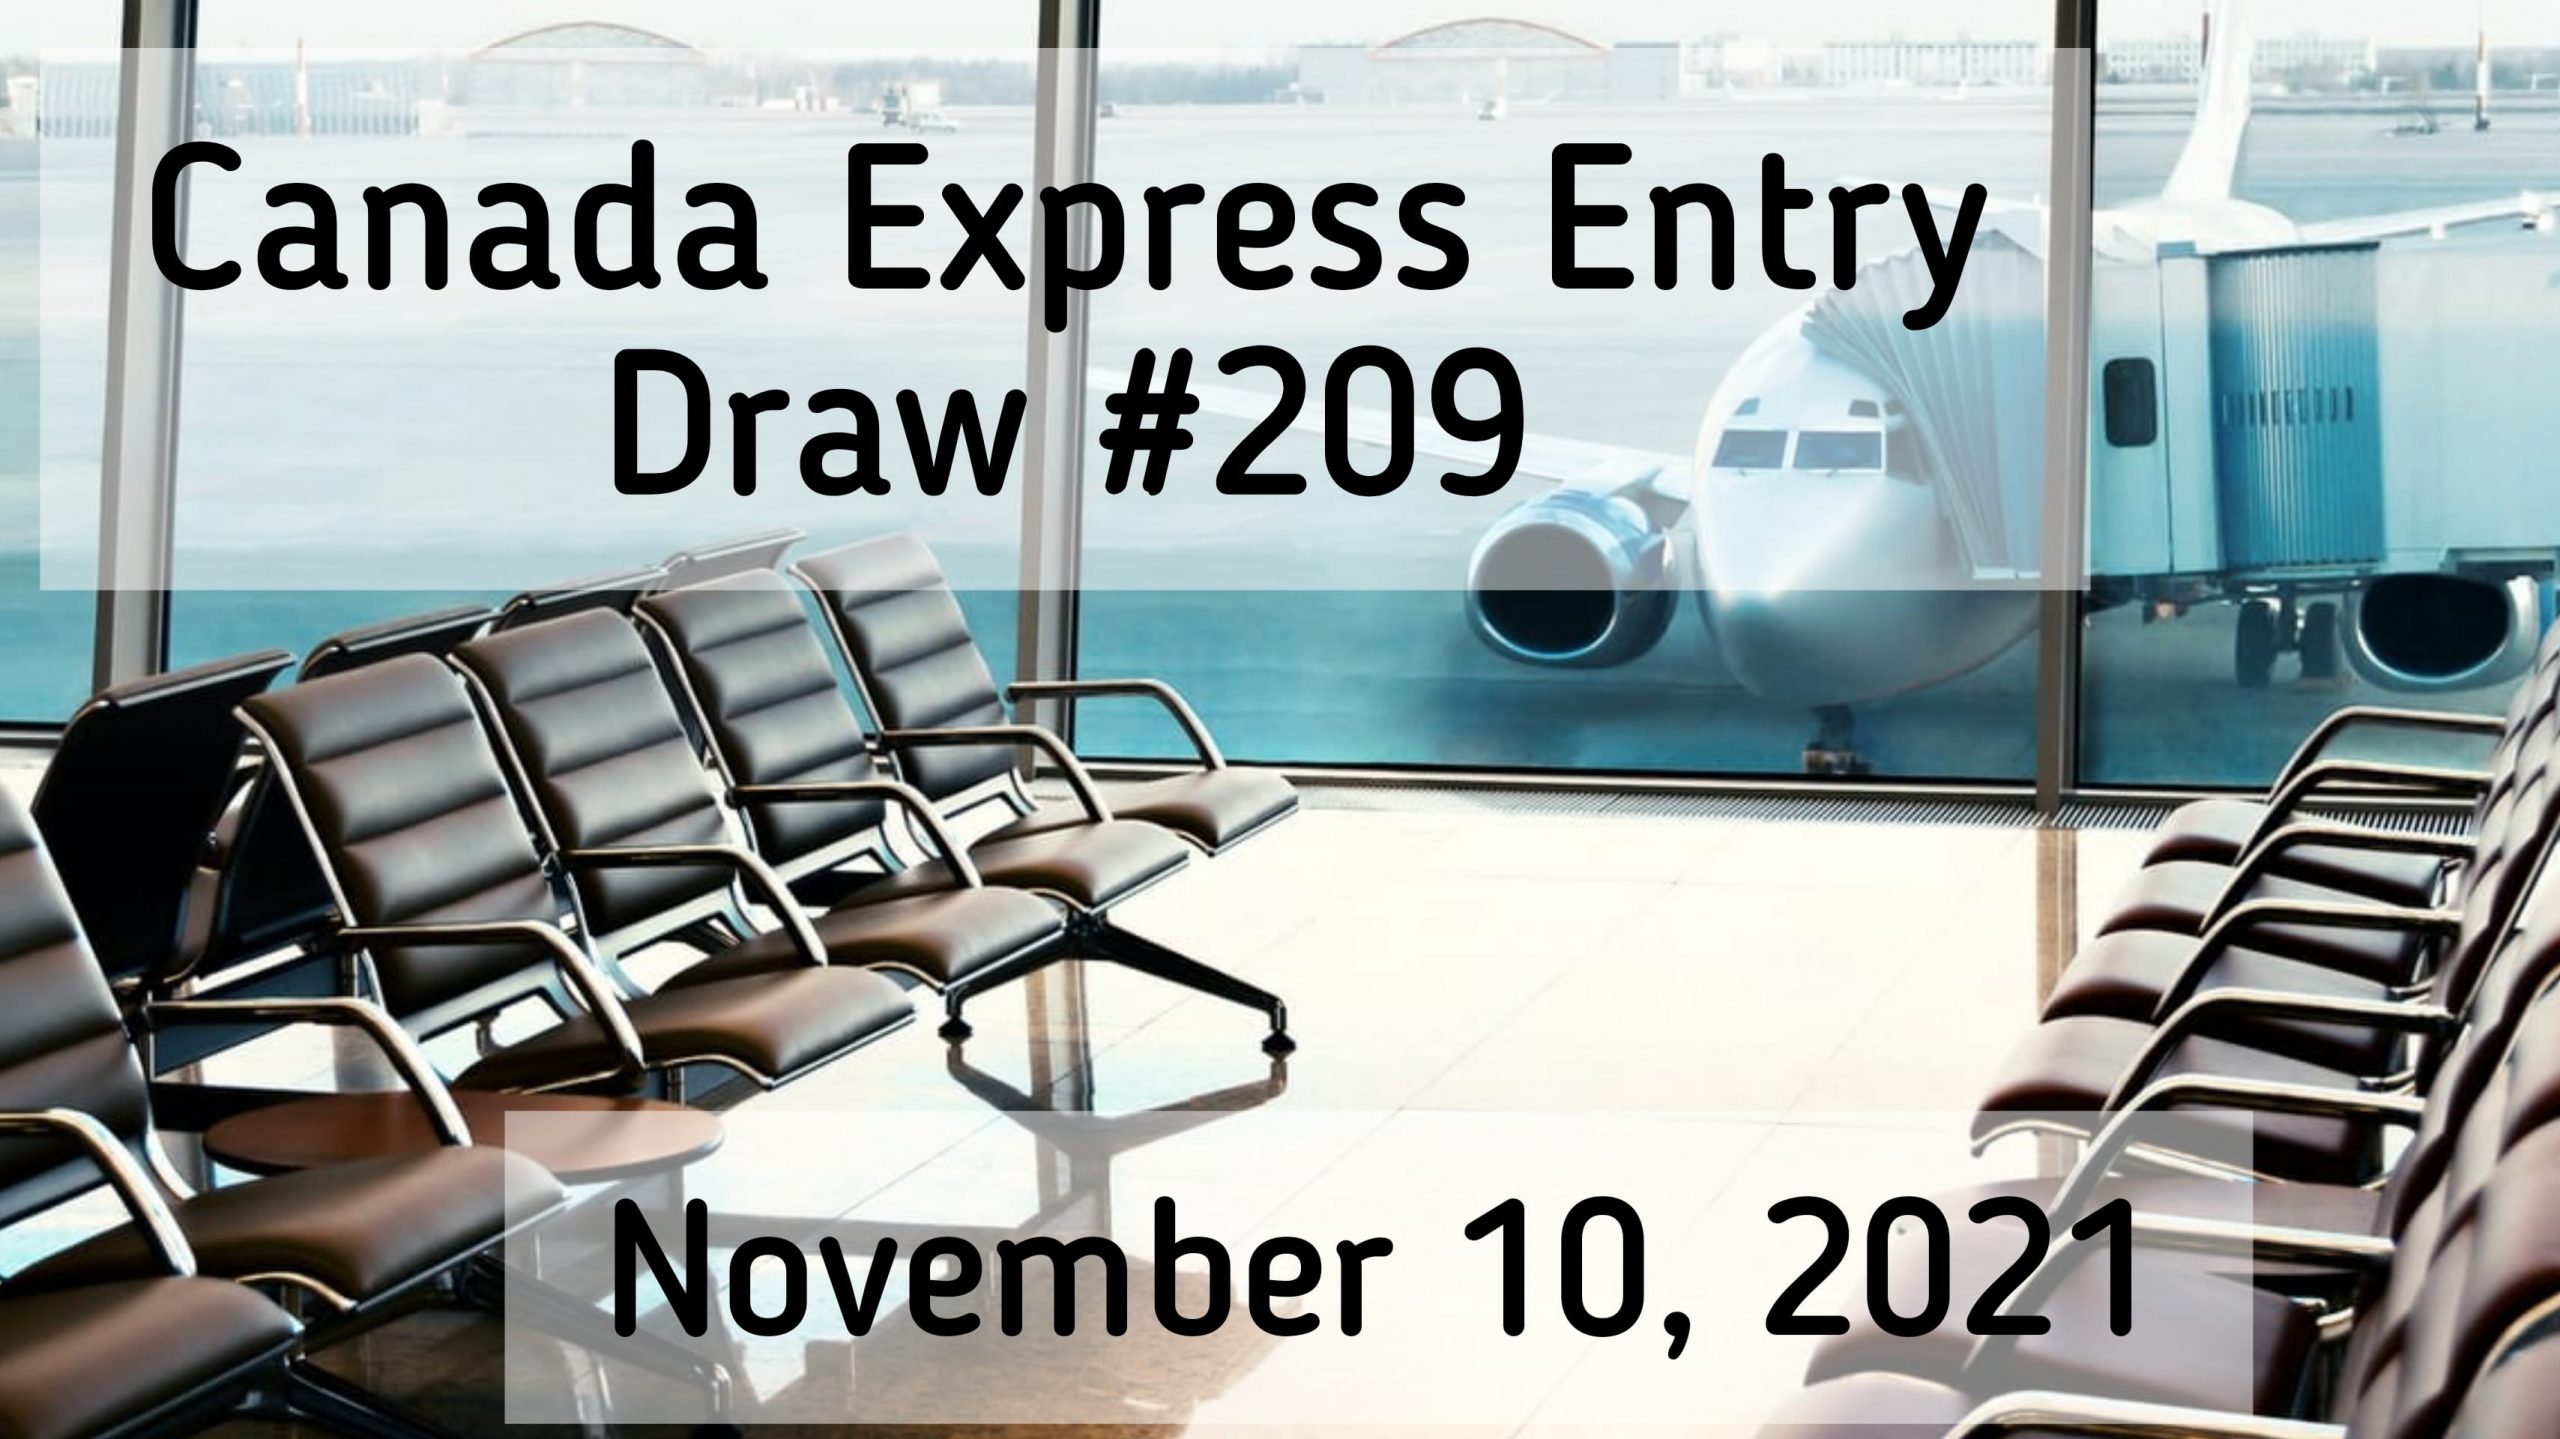 Canada Express Entry Draw 209